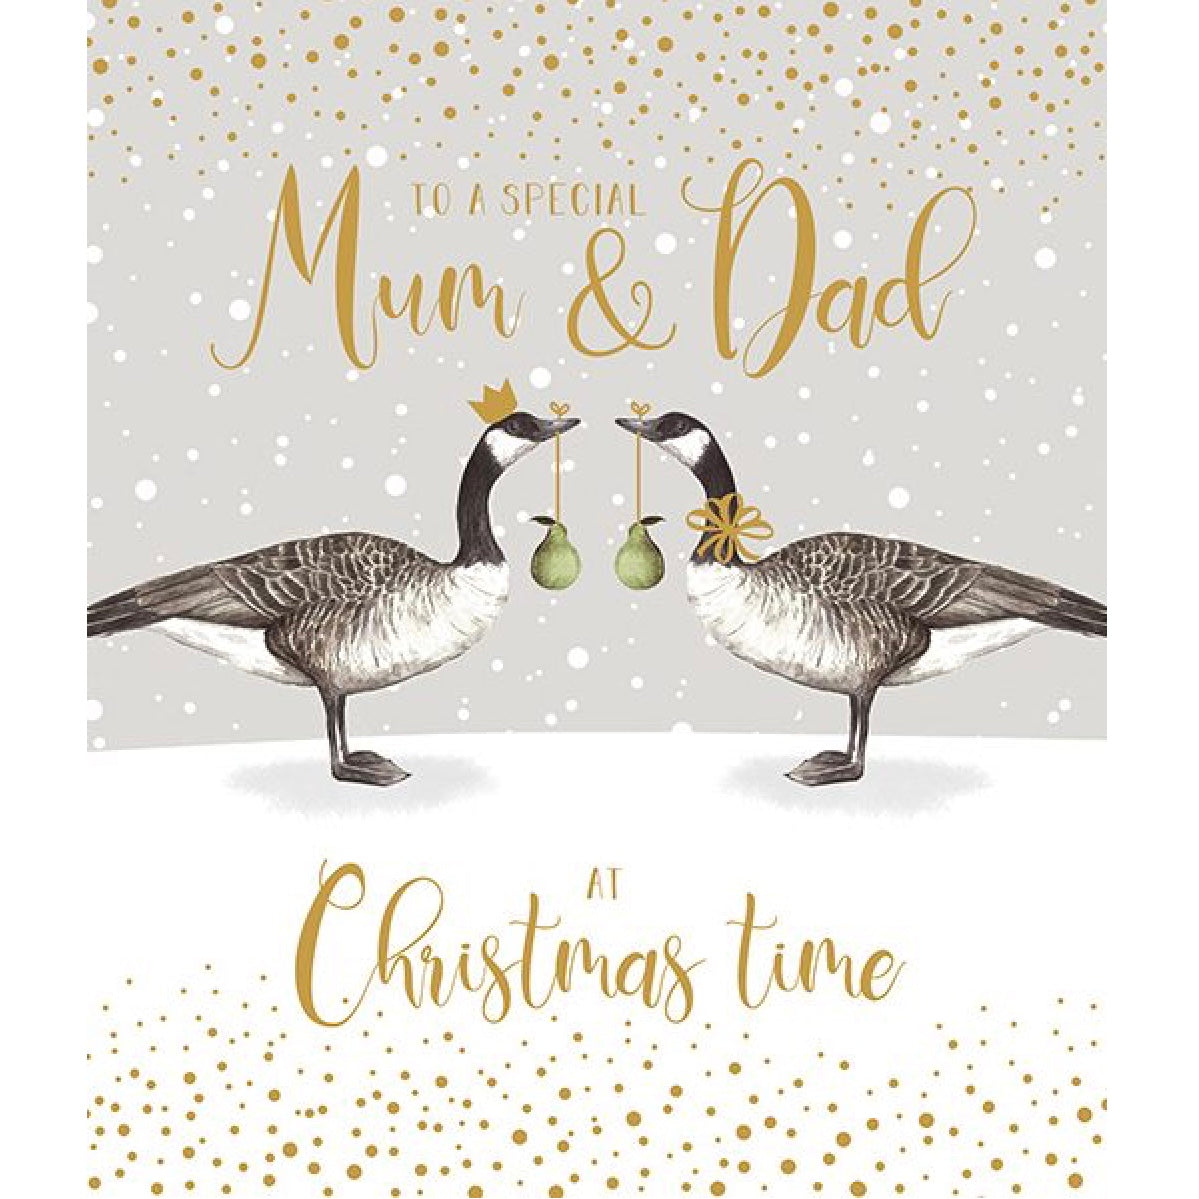 "To a special Mum & Dad at Christmas time" Geese Greeting Card